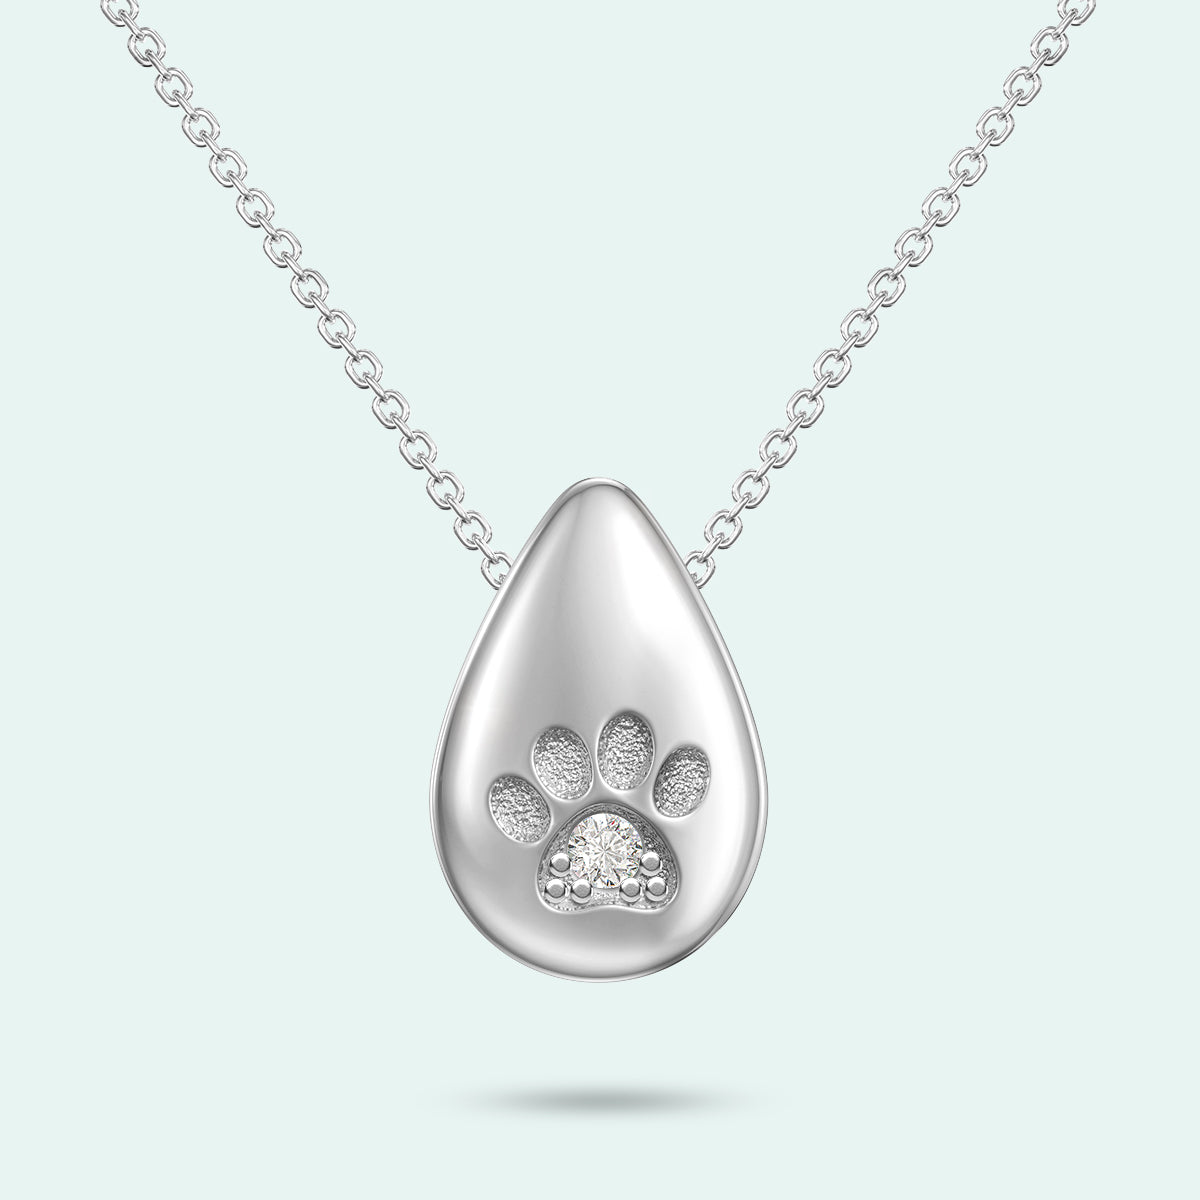 LOVE IN A JEWEL - "The Paw Print"